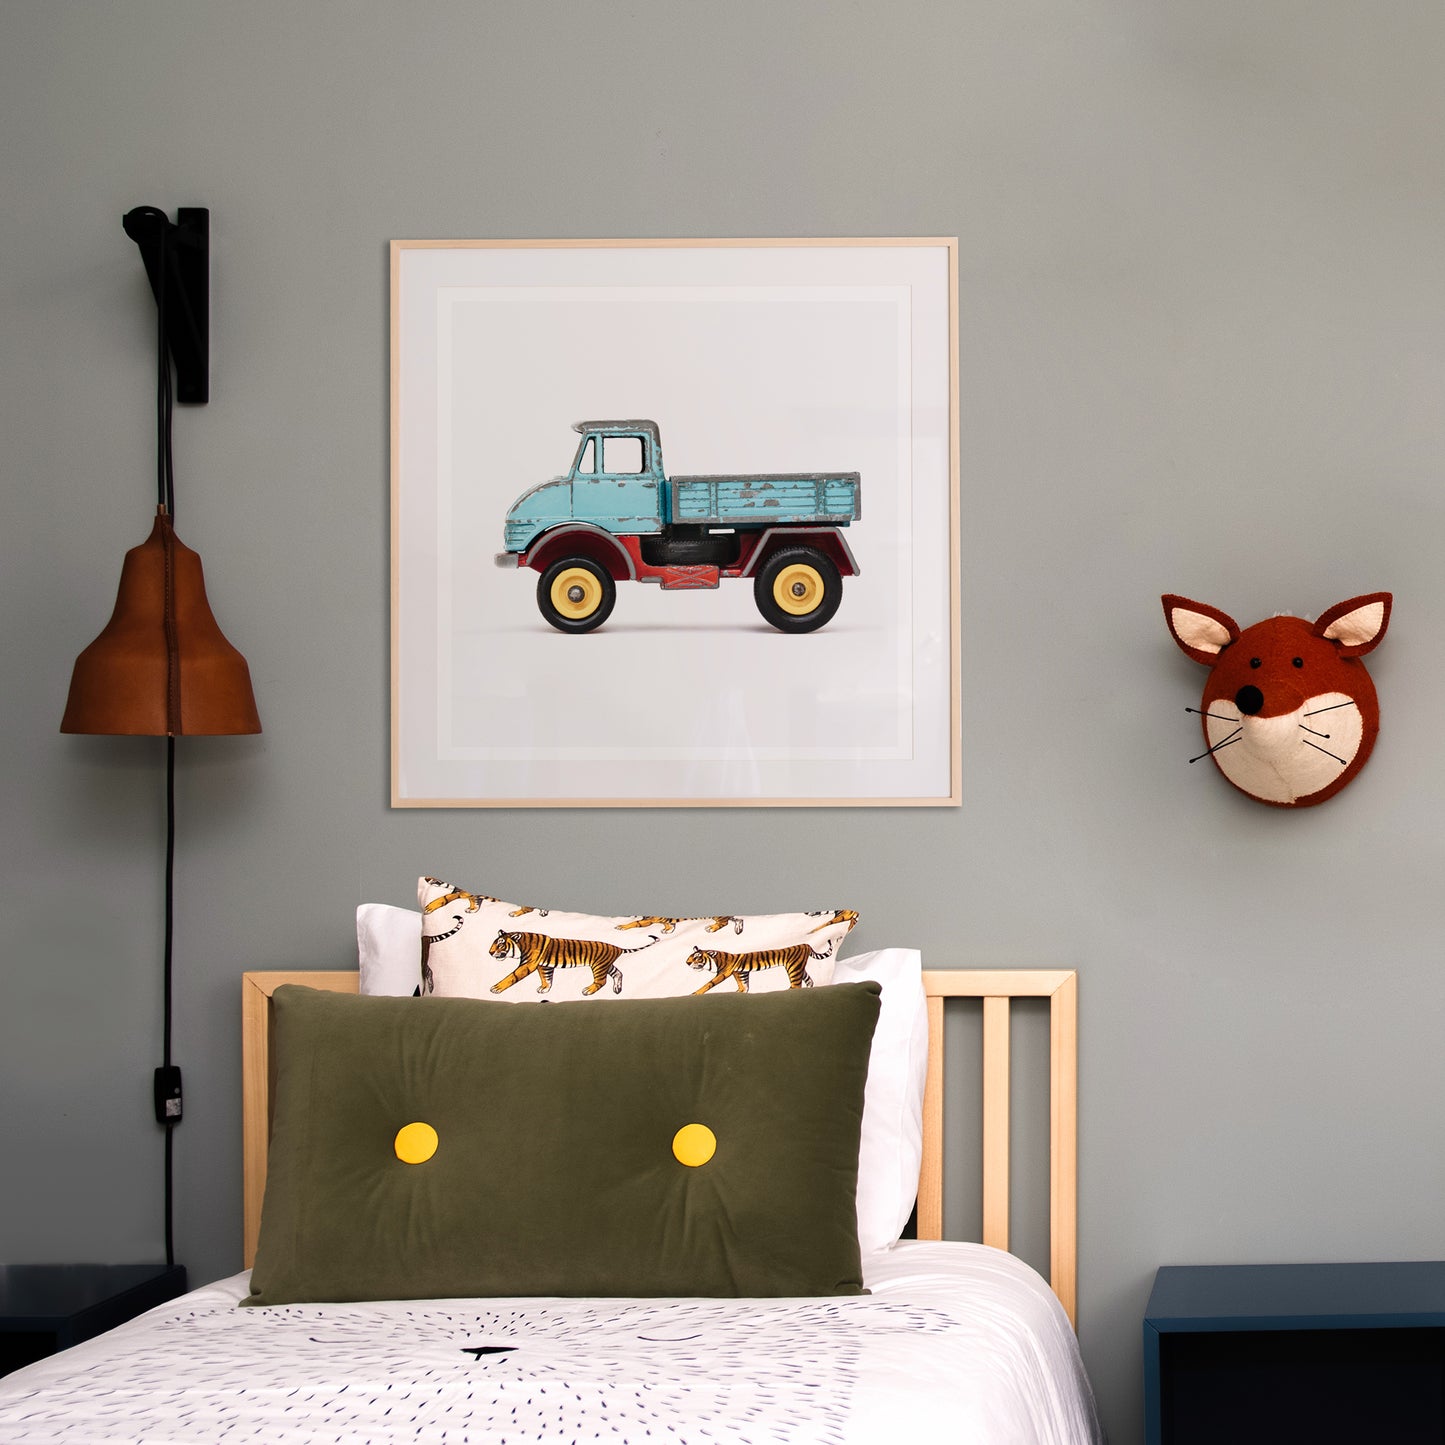 Load image into Gallery viewer, Art print of a blue farm truck against a grey background.
